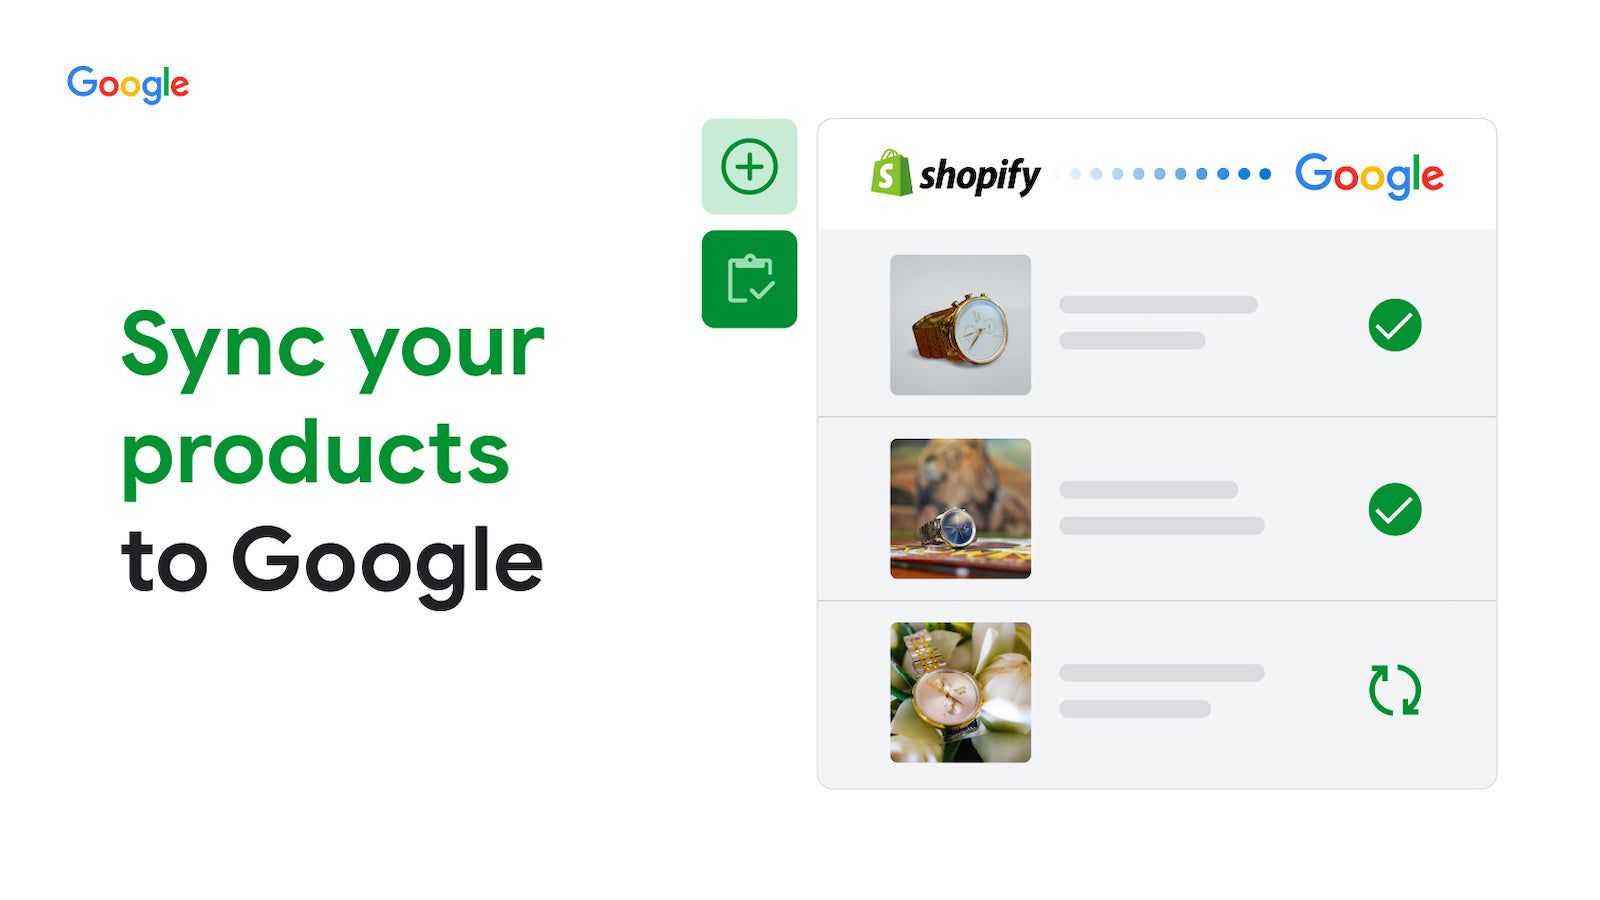 Example of syncing your products from Shopify to Google